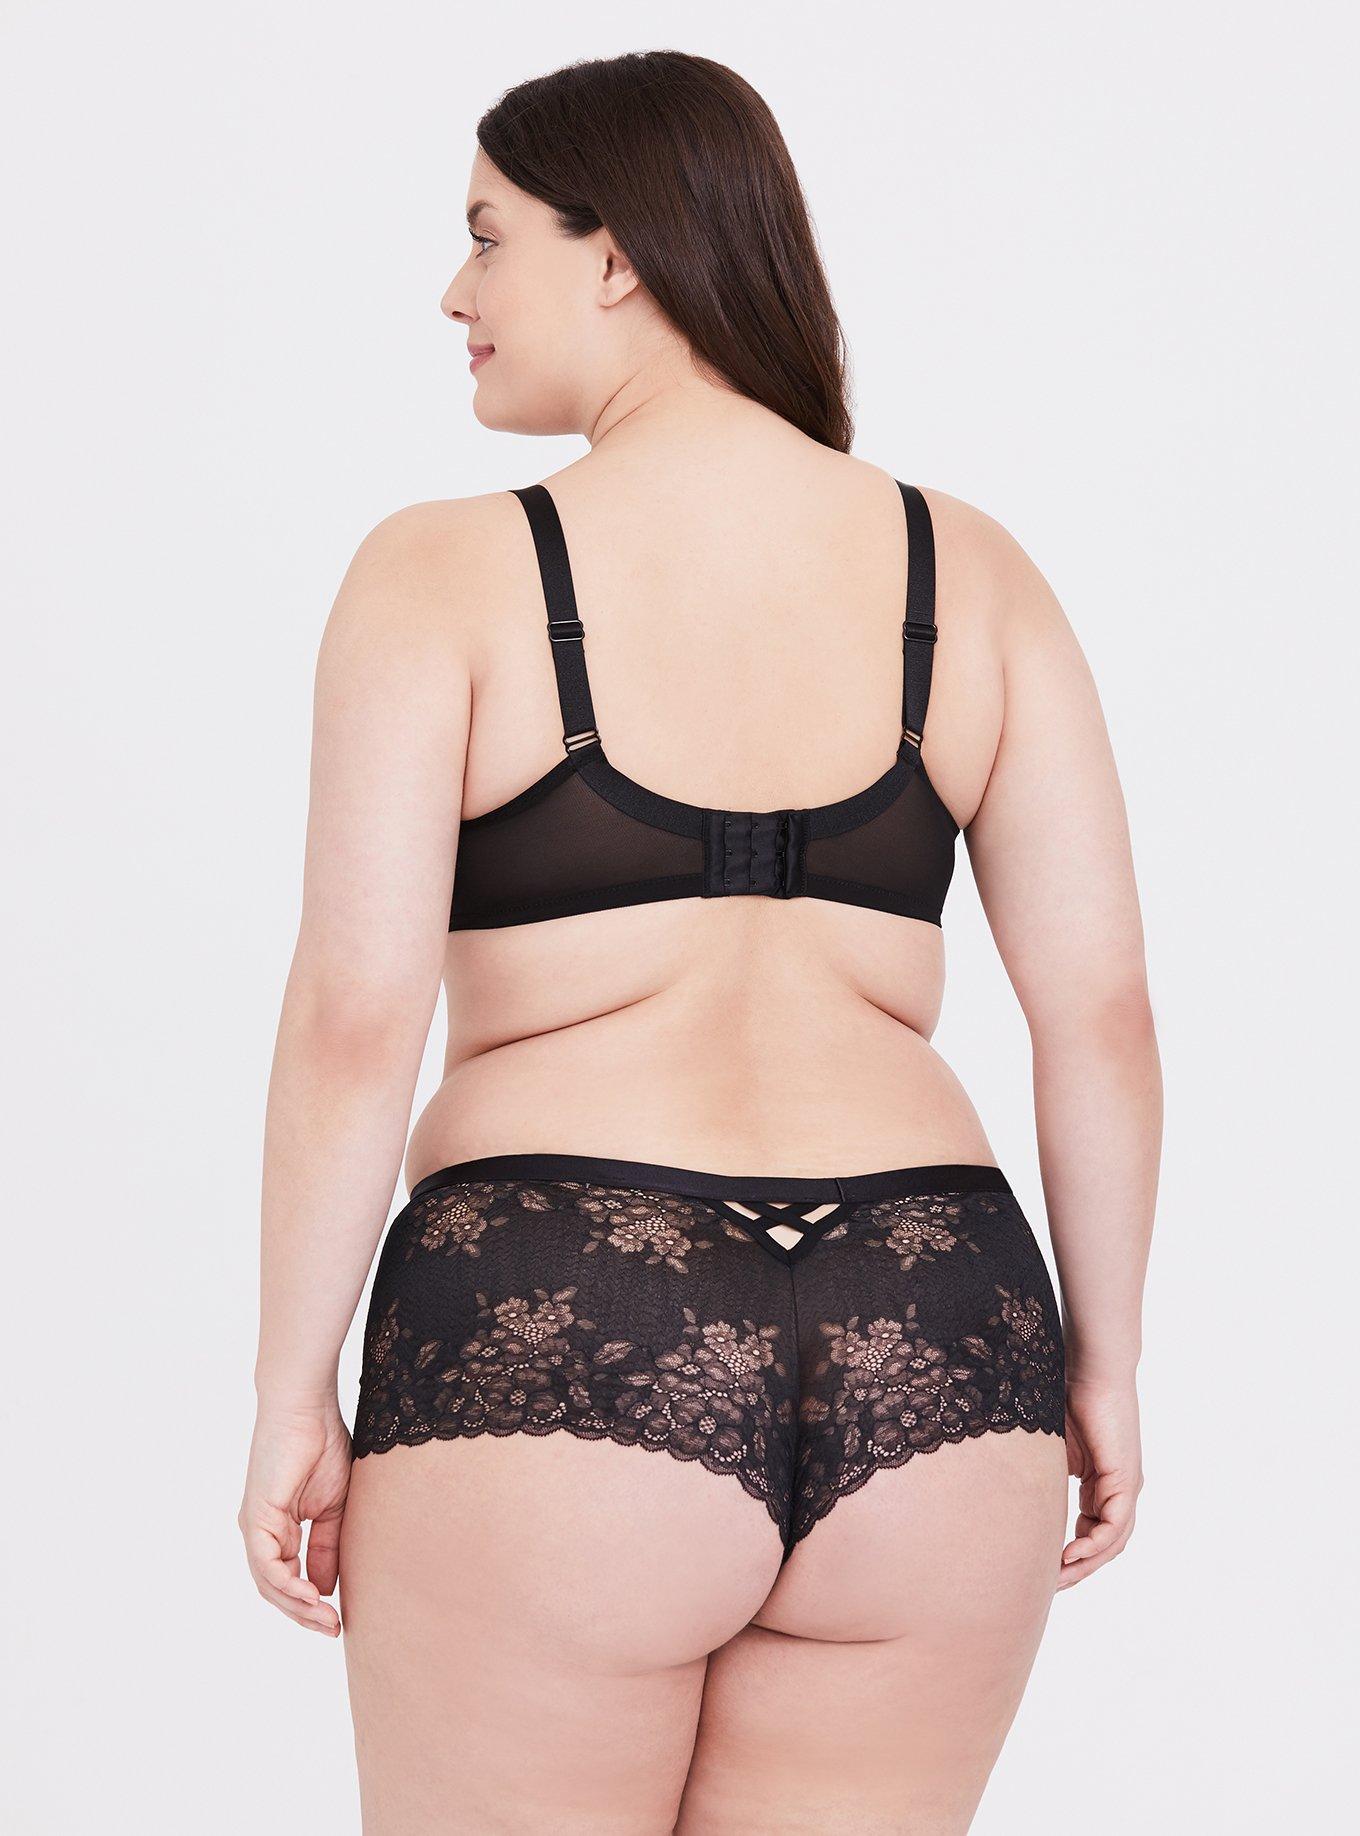 Plus Size - Full-Coverage Unlined Two Tone Lace Ballet Back Bra